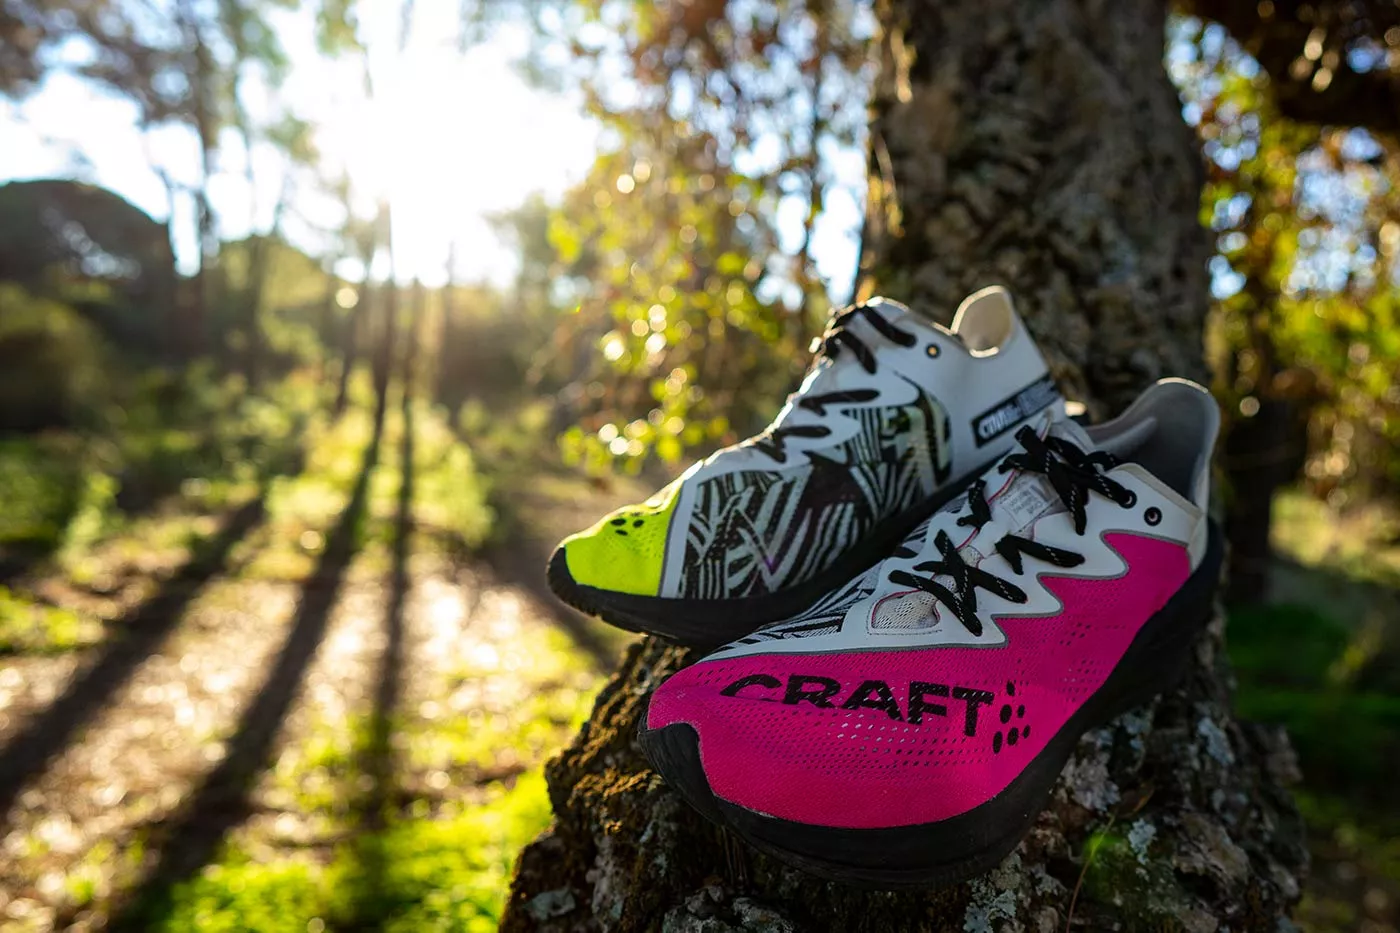 Craft CTM Ultra Carbon review